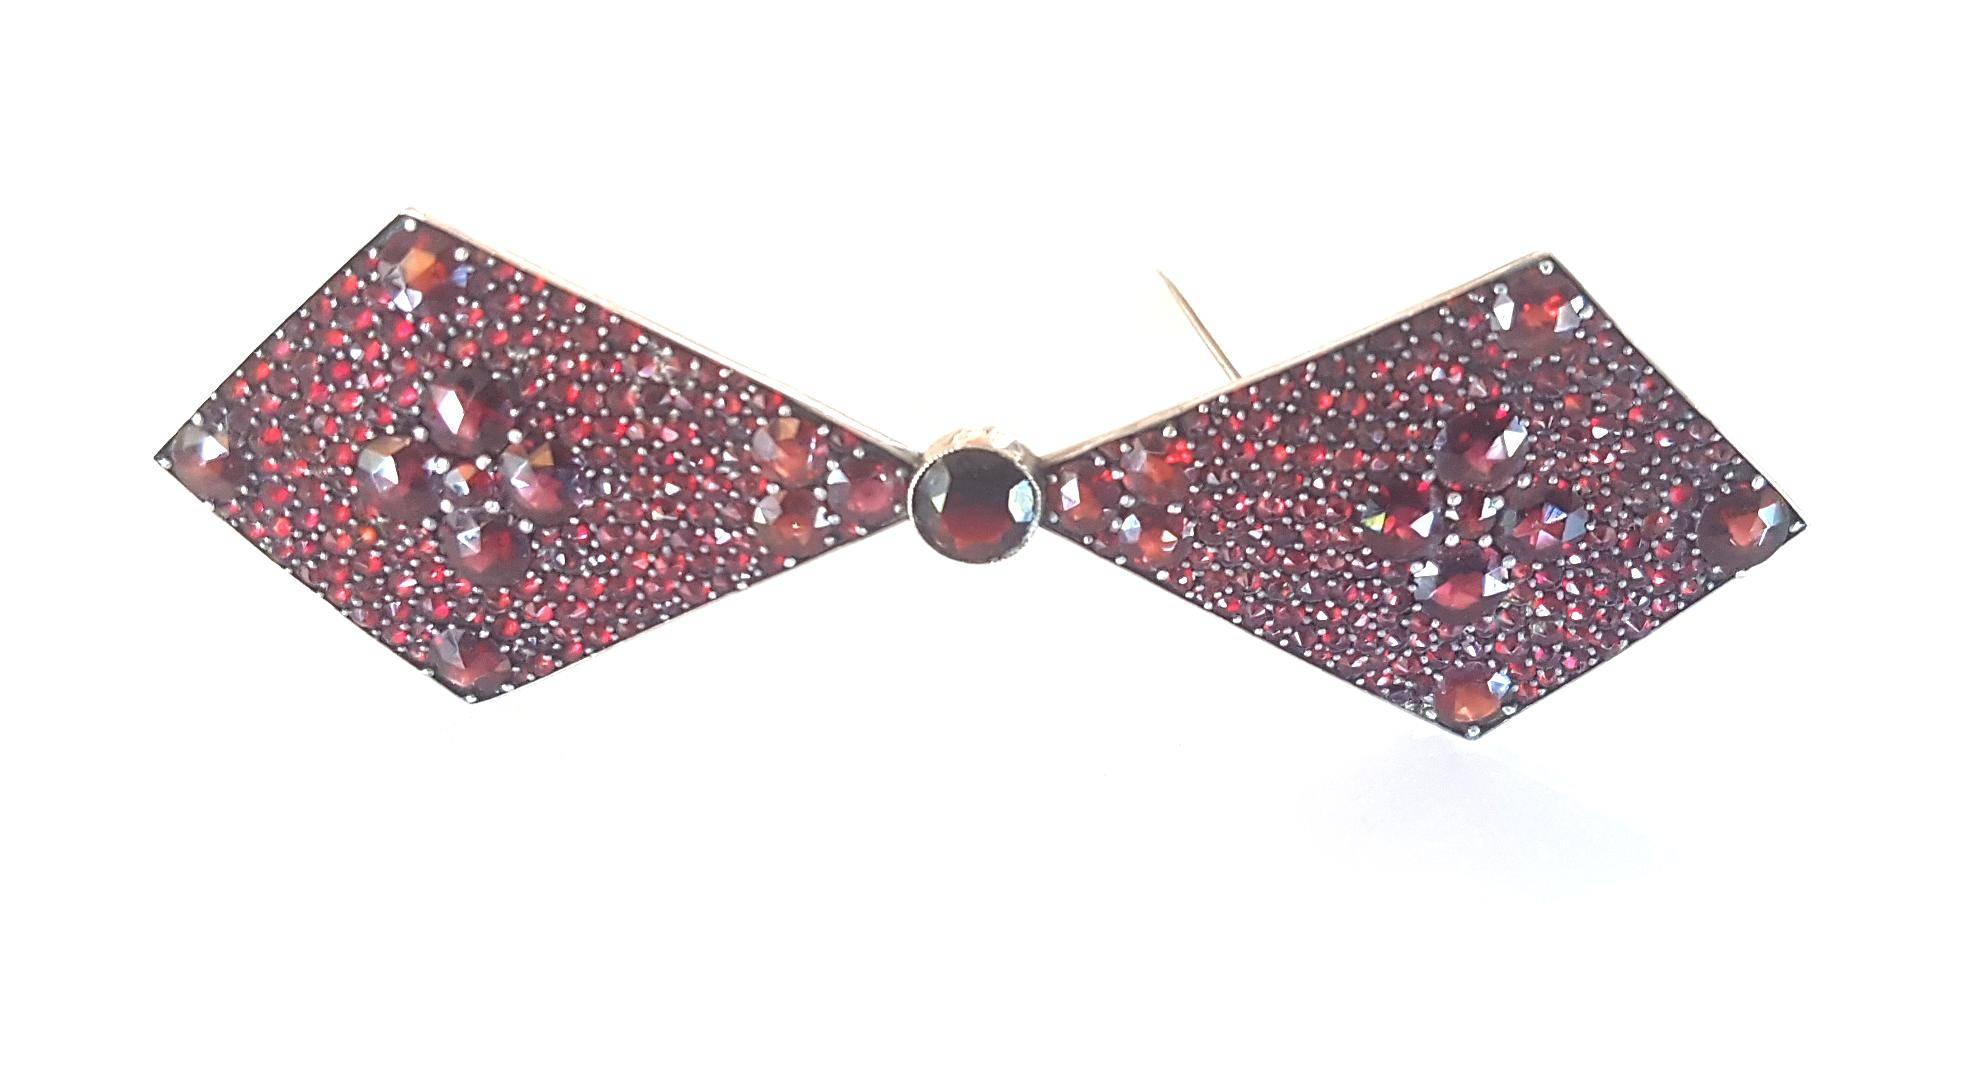 If you were born in January your birthstone is GARNET - used by travellers for protection and to light up the night. Stunning Bohemian Garnet Bow Tie Brooch of large proportions perfect for New Year's Eve! Measures 11cm x 3.5cm. This item is unique